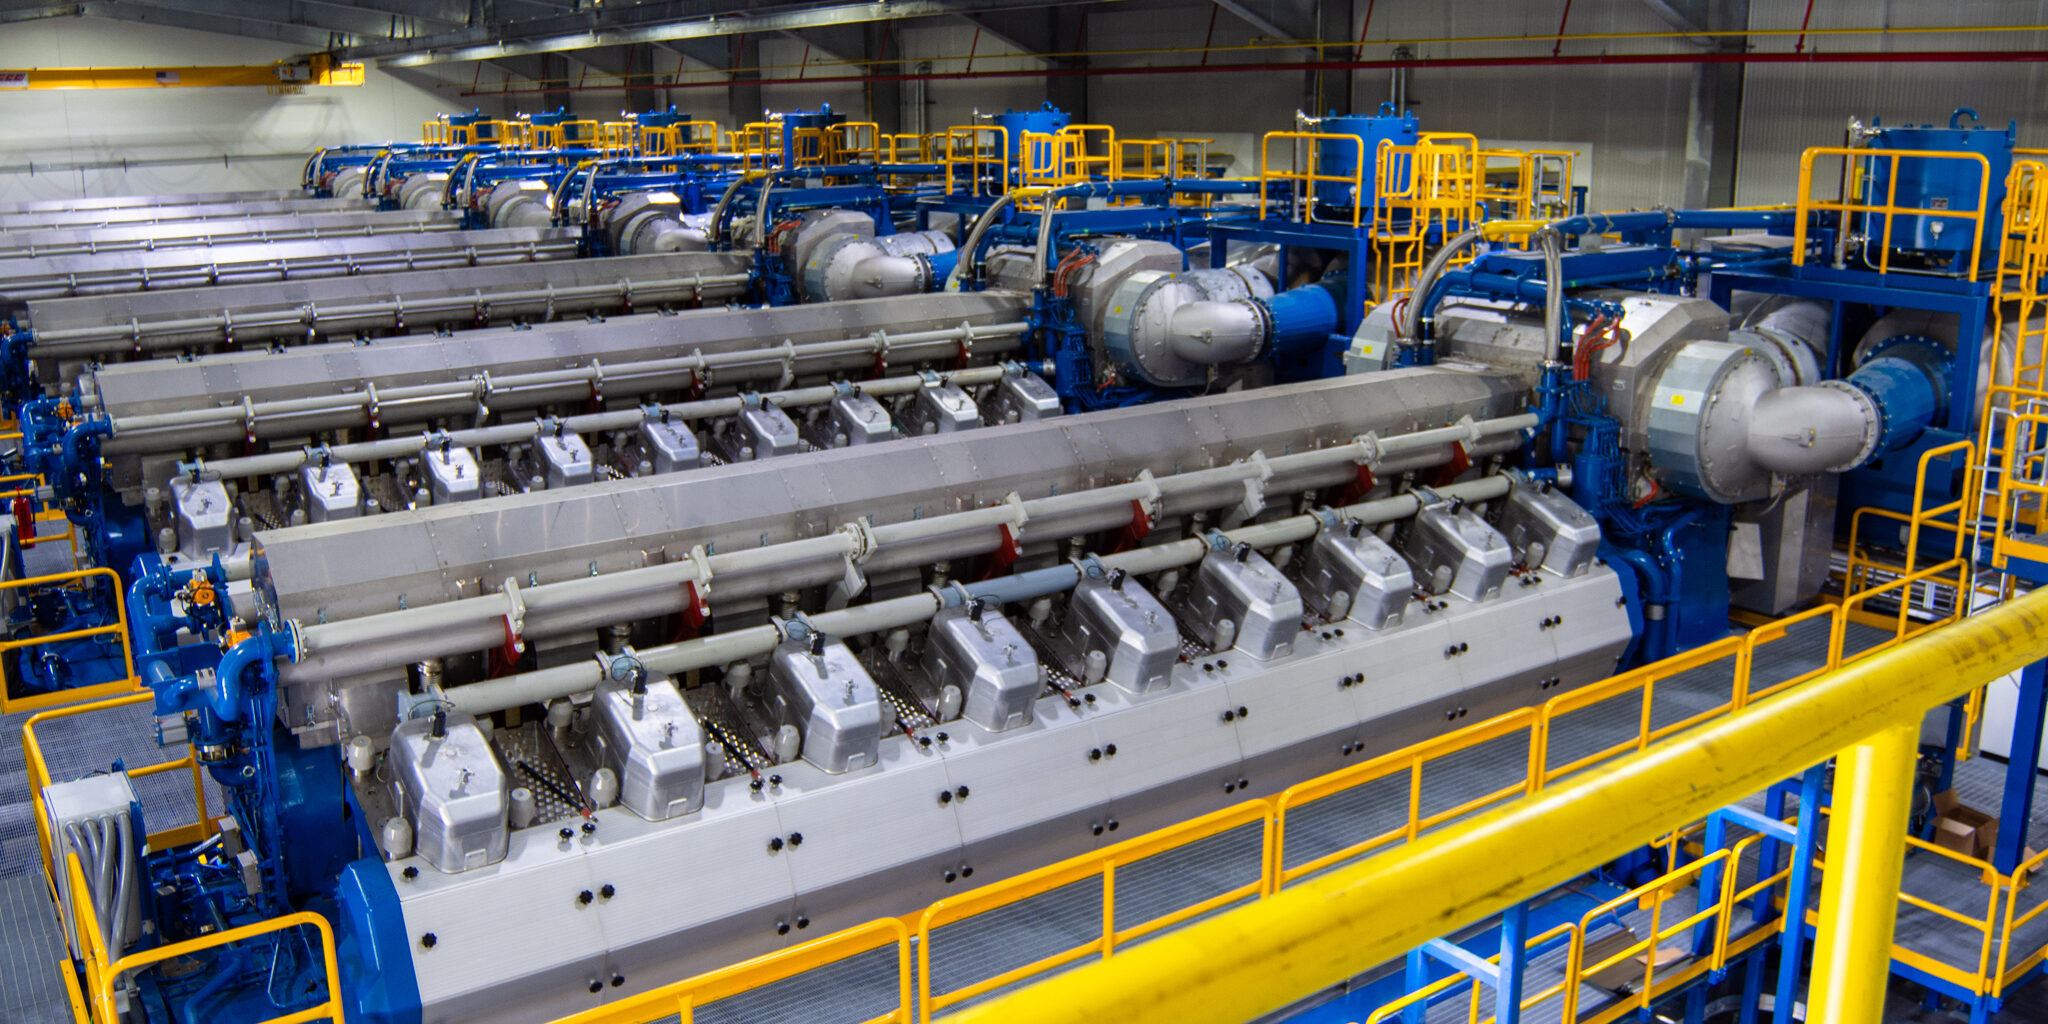 Blue and yellow industrial-size engines laid out in a row in a large building.